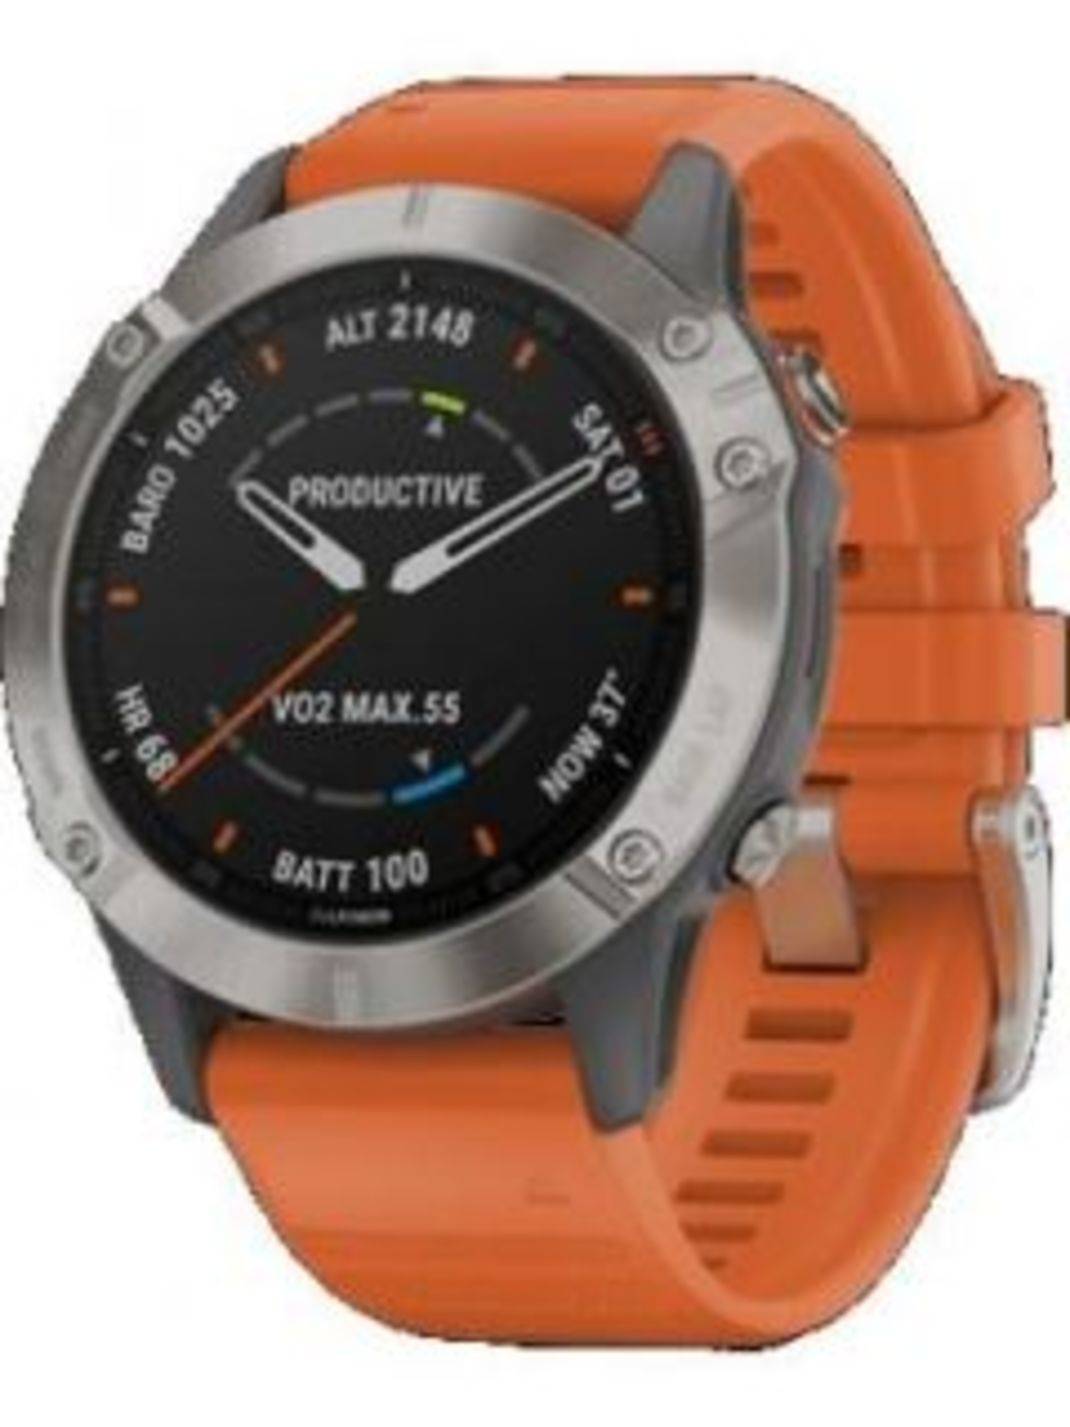 Compare Garmin Fenix 6 Sapphire vs Garmin Forerunner 735XT vs Garmin Forerunner 945 - Garmin Fenix 6 Sapphire vs Garmin Forerunner 735XT vs Garmin Forerunner Comparison by Price, Specifications, Reviews &amp; Features | Gadgets Now